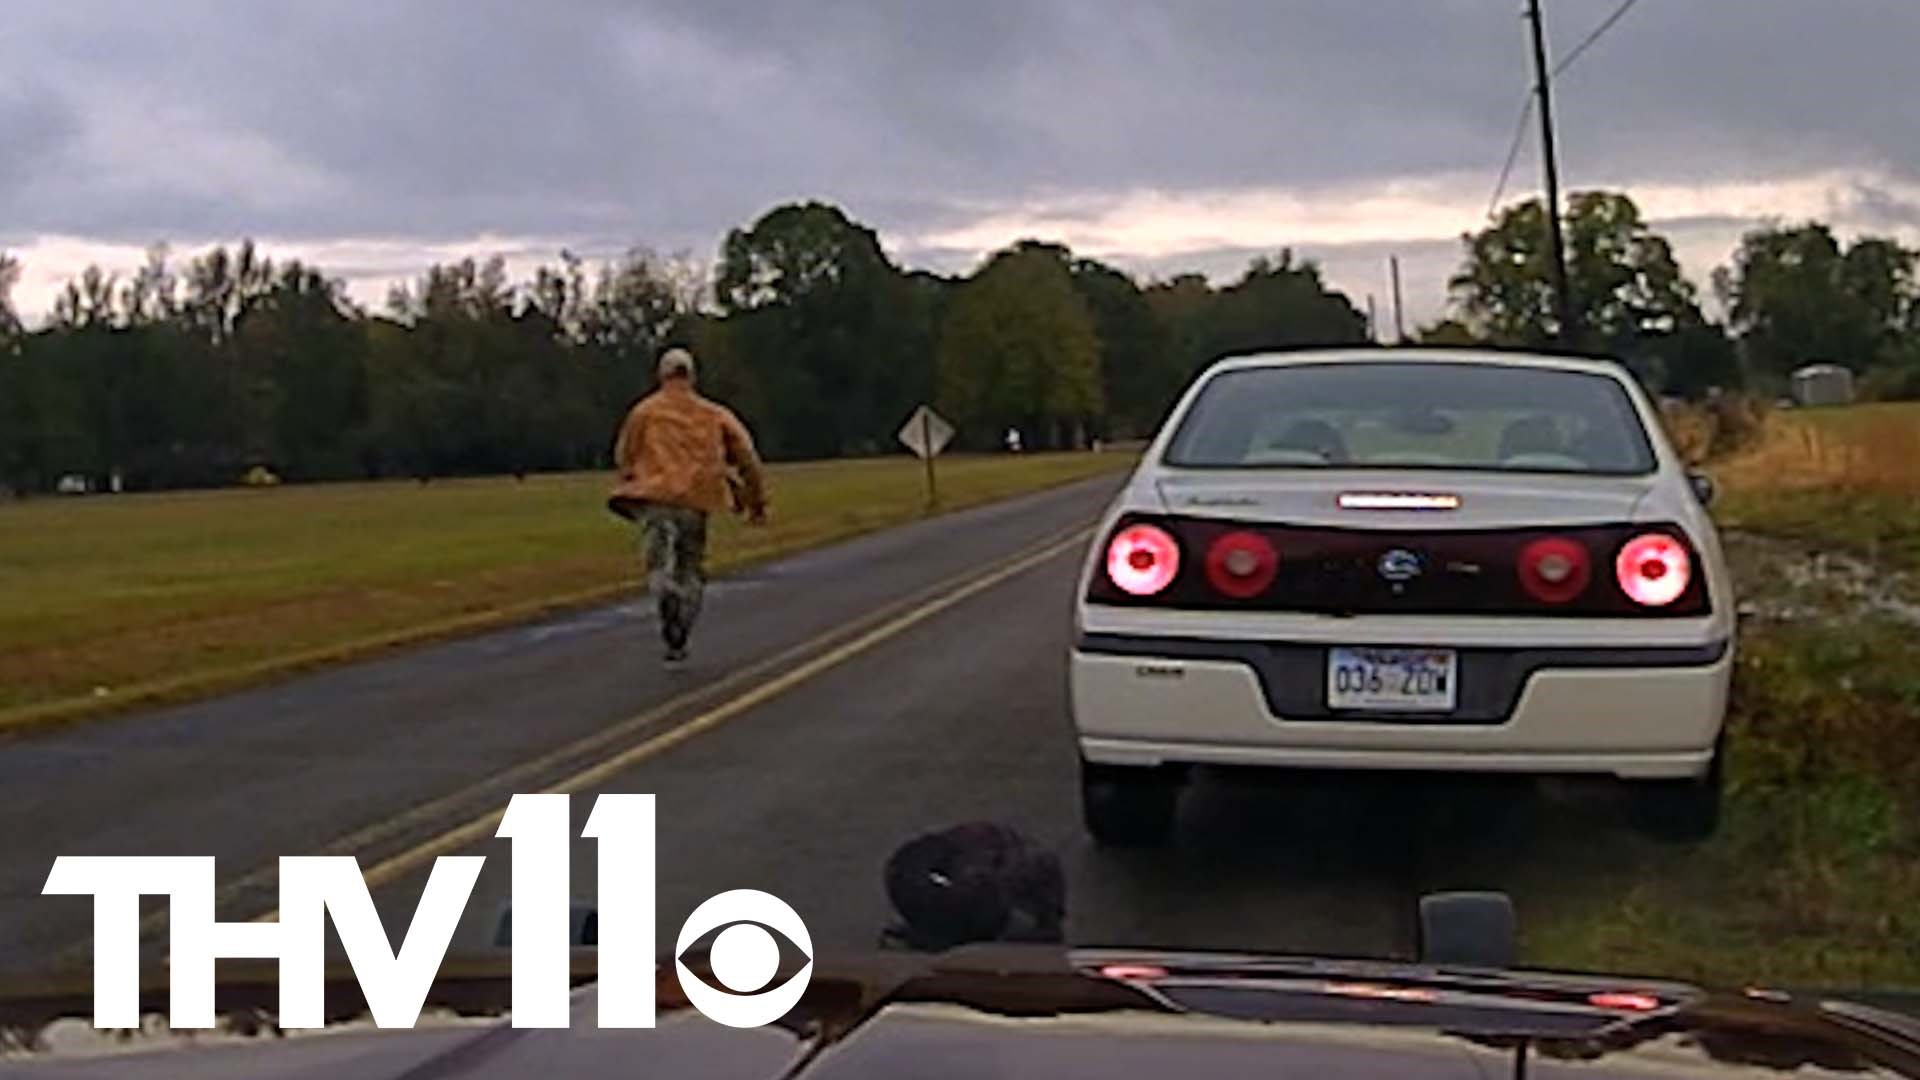 The unknown man, who is being dubbed as Pottsville Forrest Gump, ran into the distance as the driver was being pulled over and given a warning.